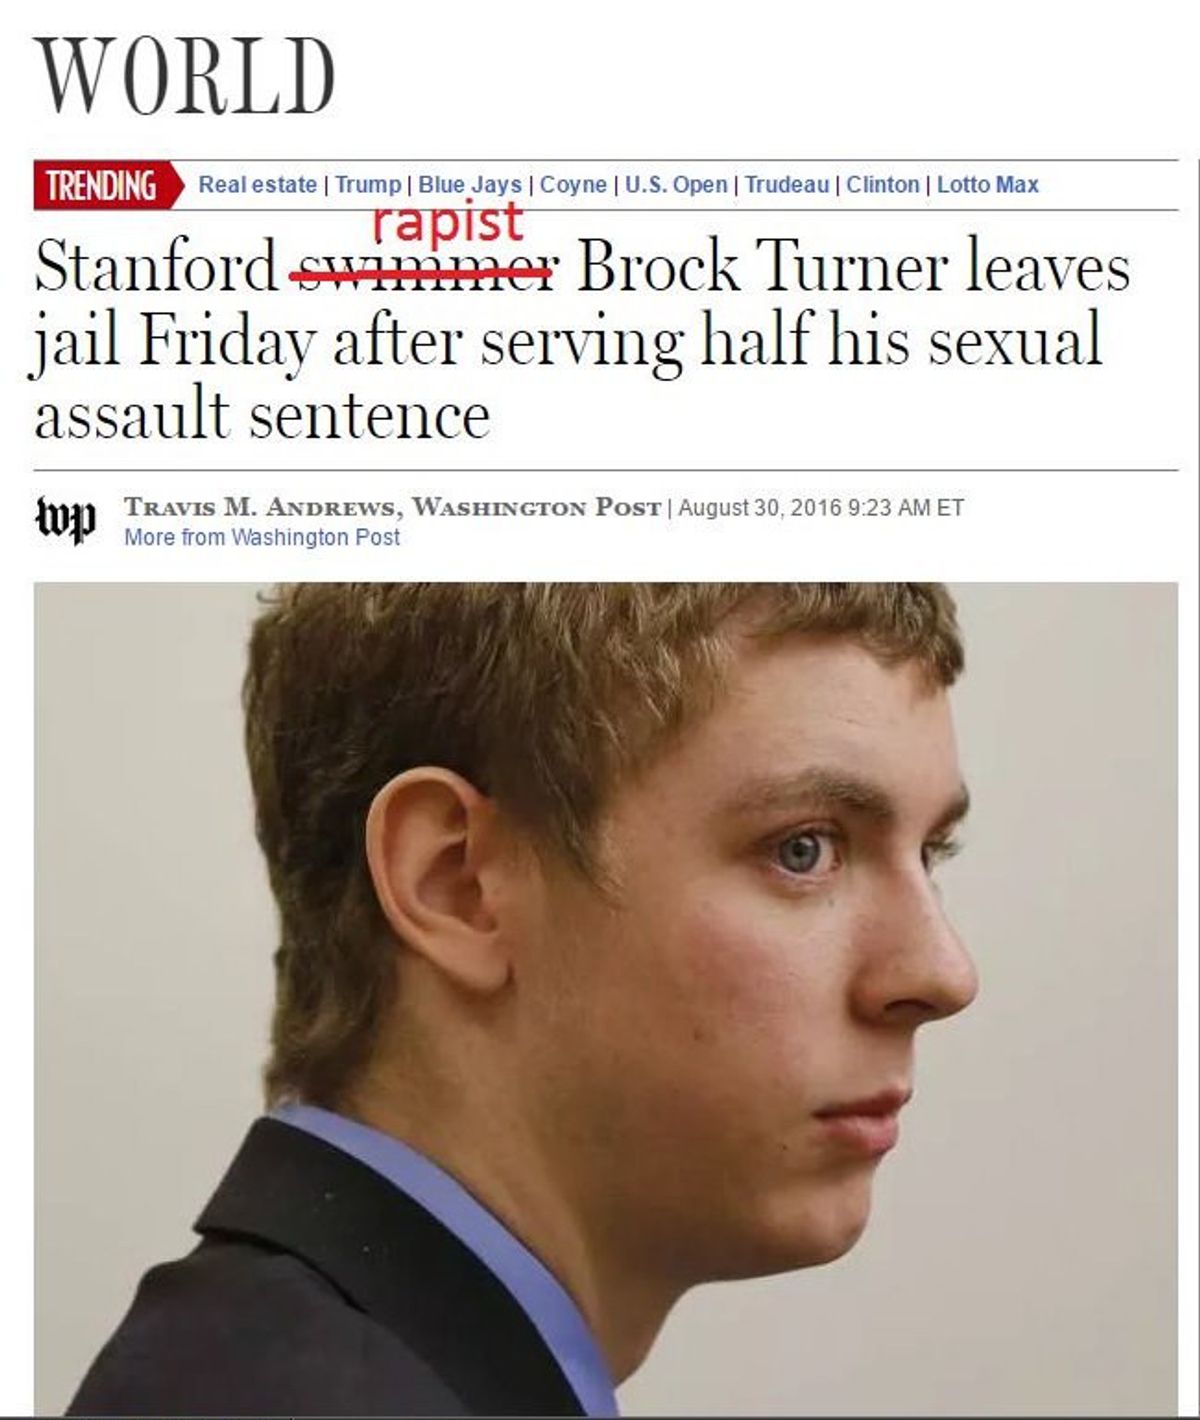 Why I Am Personally Offended By Brock Turner's Case